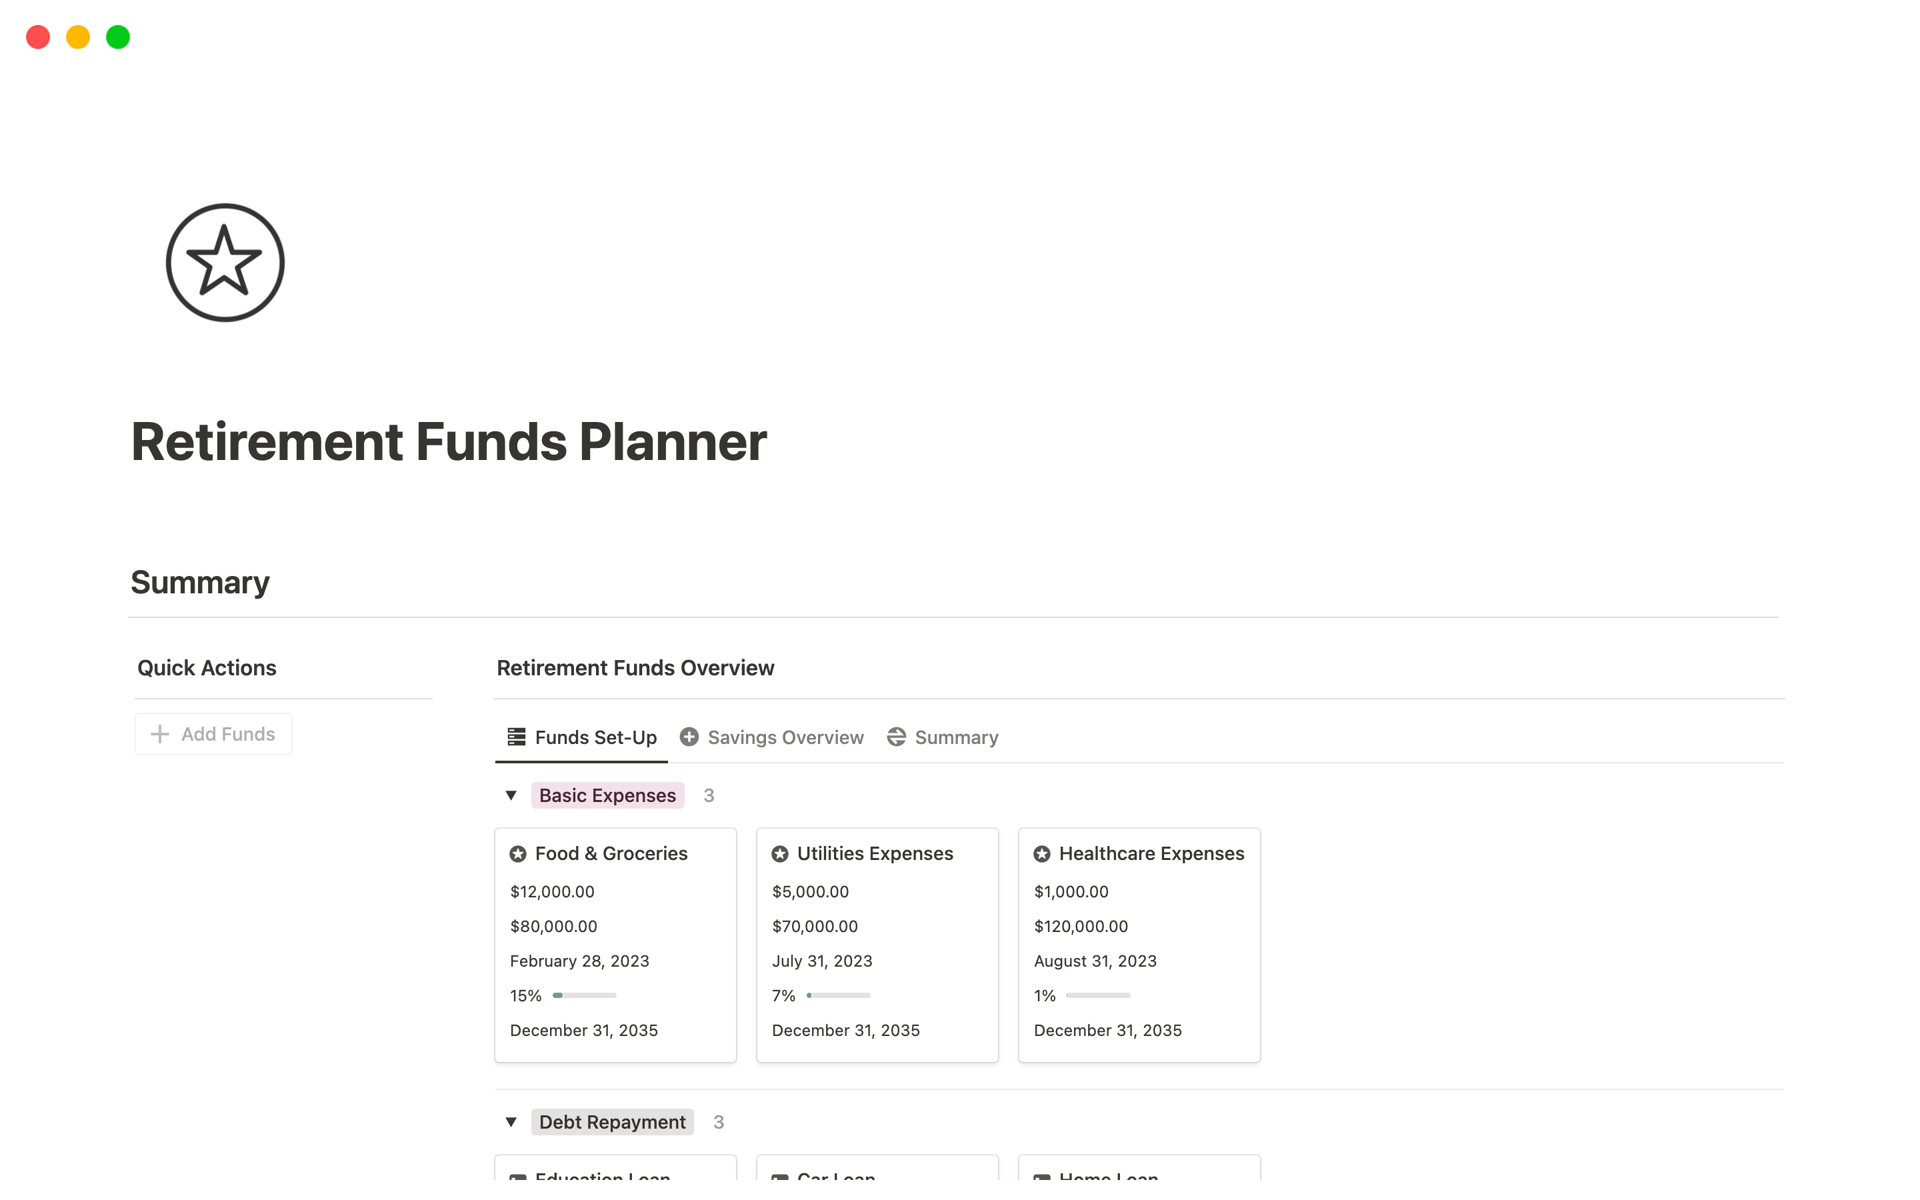 This tracker helps individuals plan for their retirement by estimating future expenses, setting retirement savings goals, and tracking progress toward those goals.